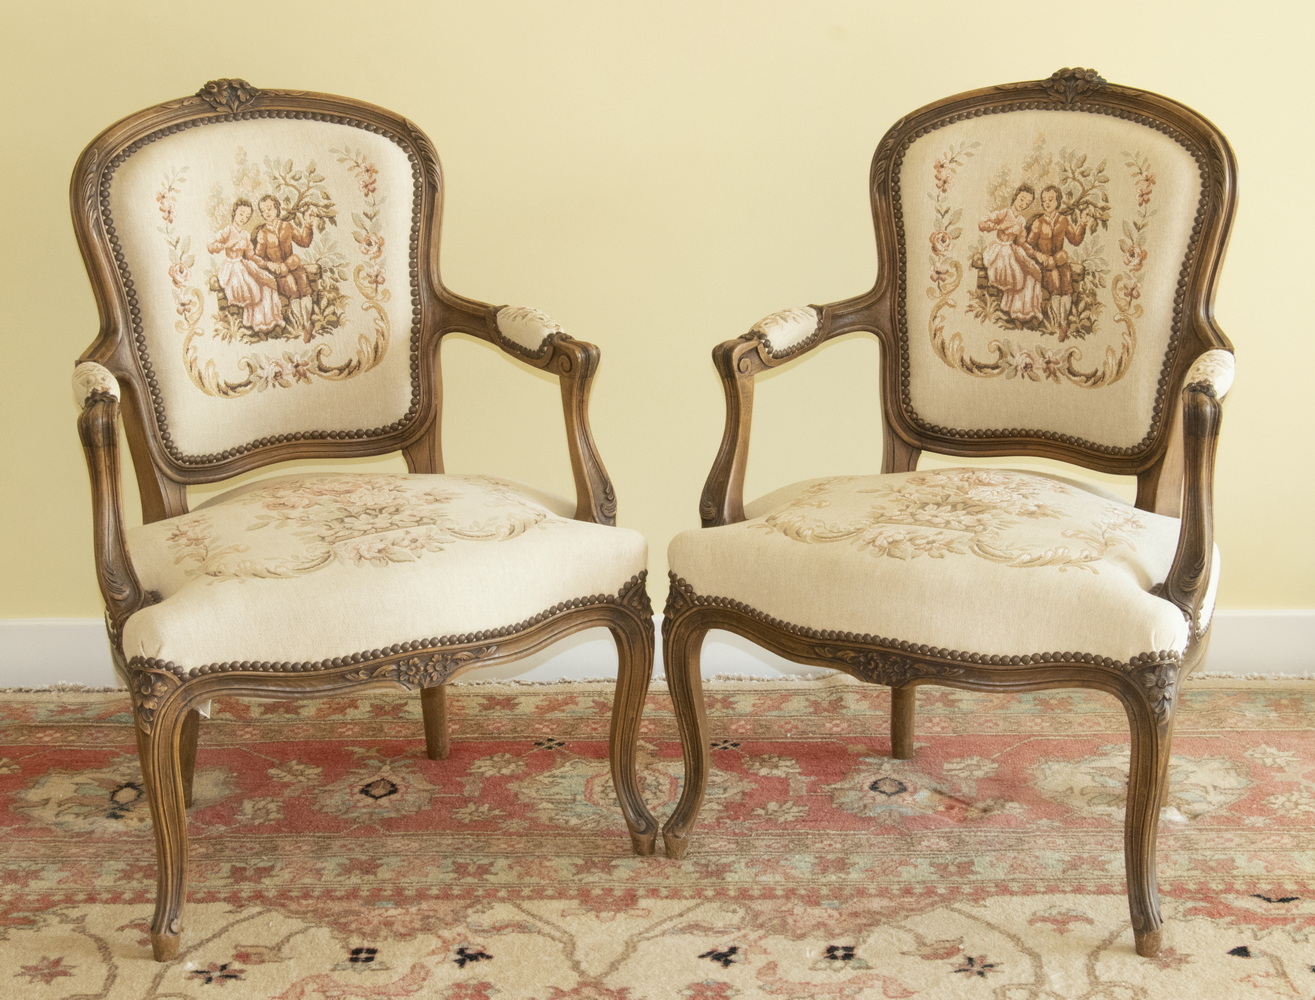 PAIR OF ARMCHAIRS A matching pair